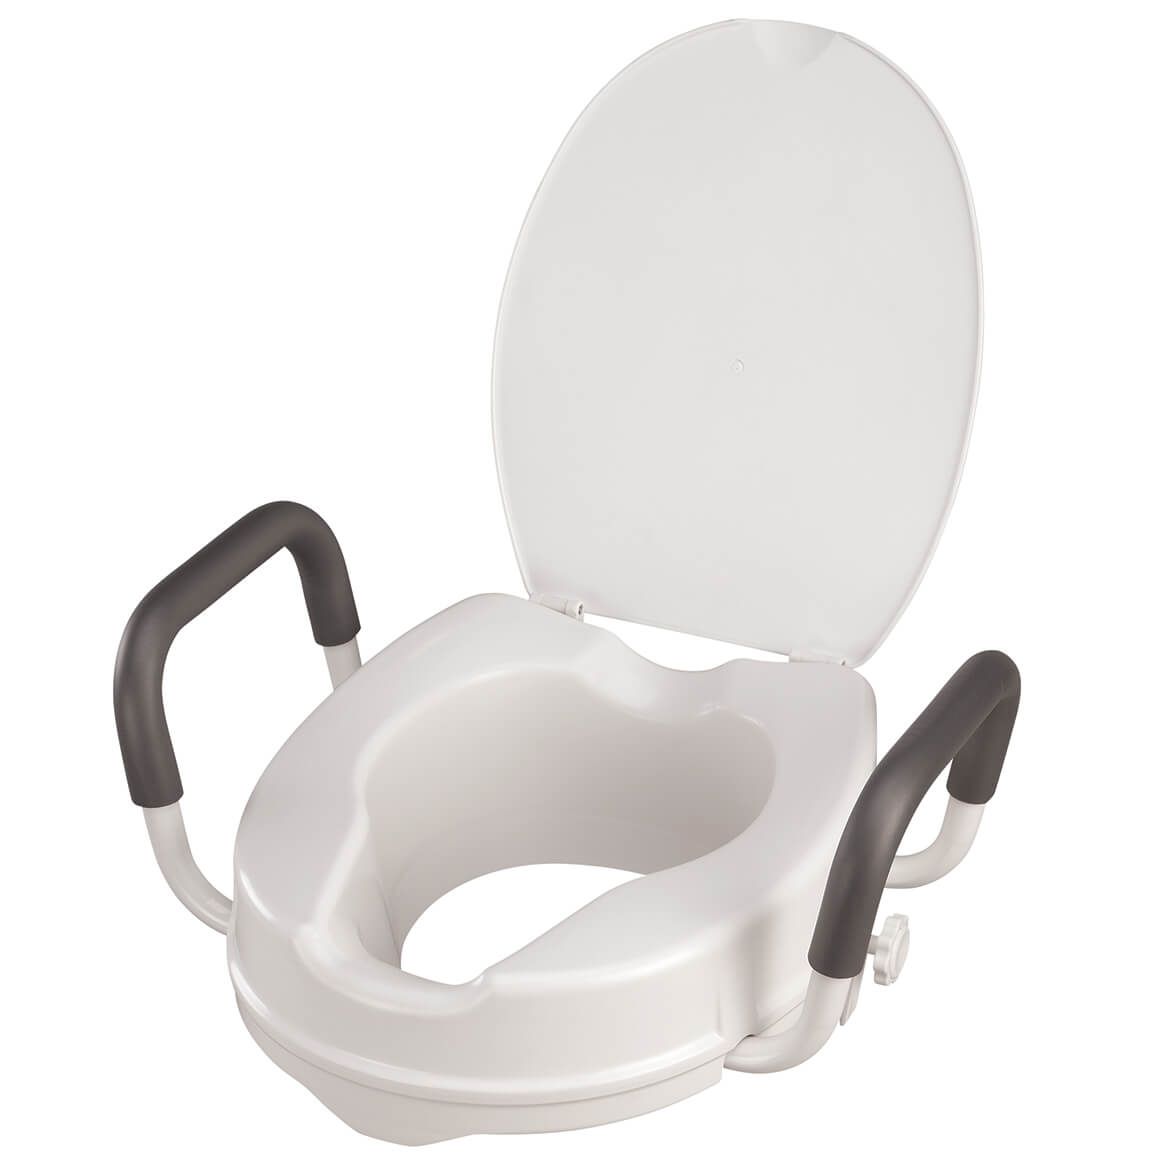 4" Toilet Seat with Arms and Lid + '-' + 357861